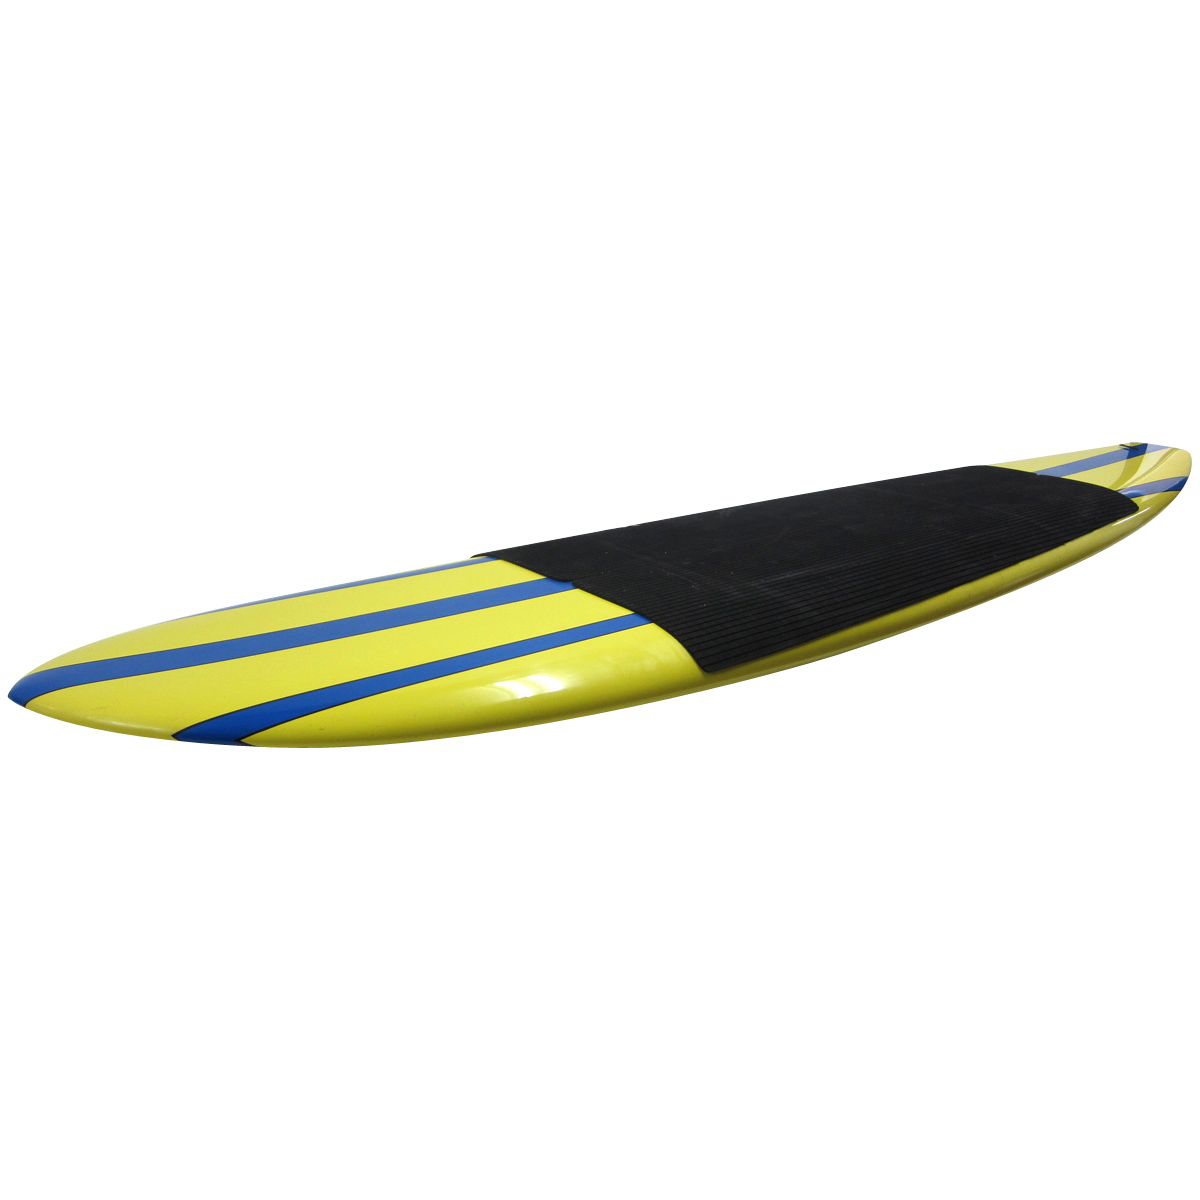 LAIRD HAMILTON / 10`0 Stand Up Paddle  Laird Hamilton Model Surftech